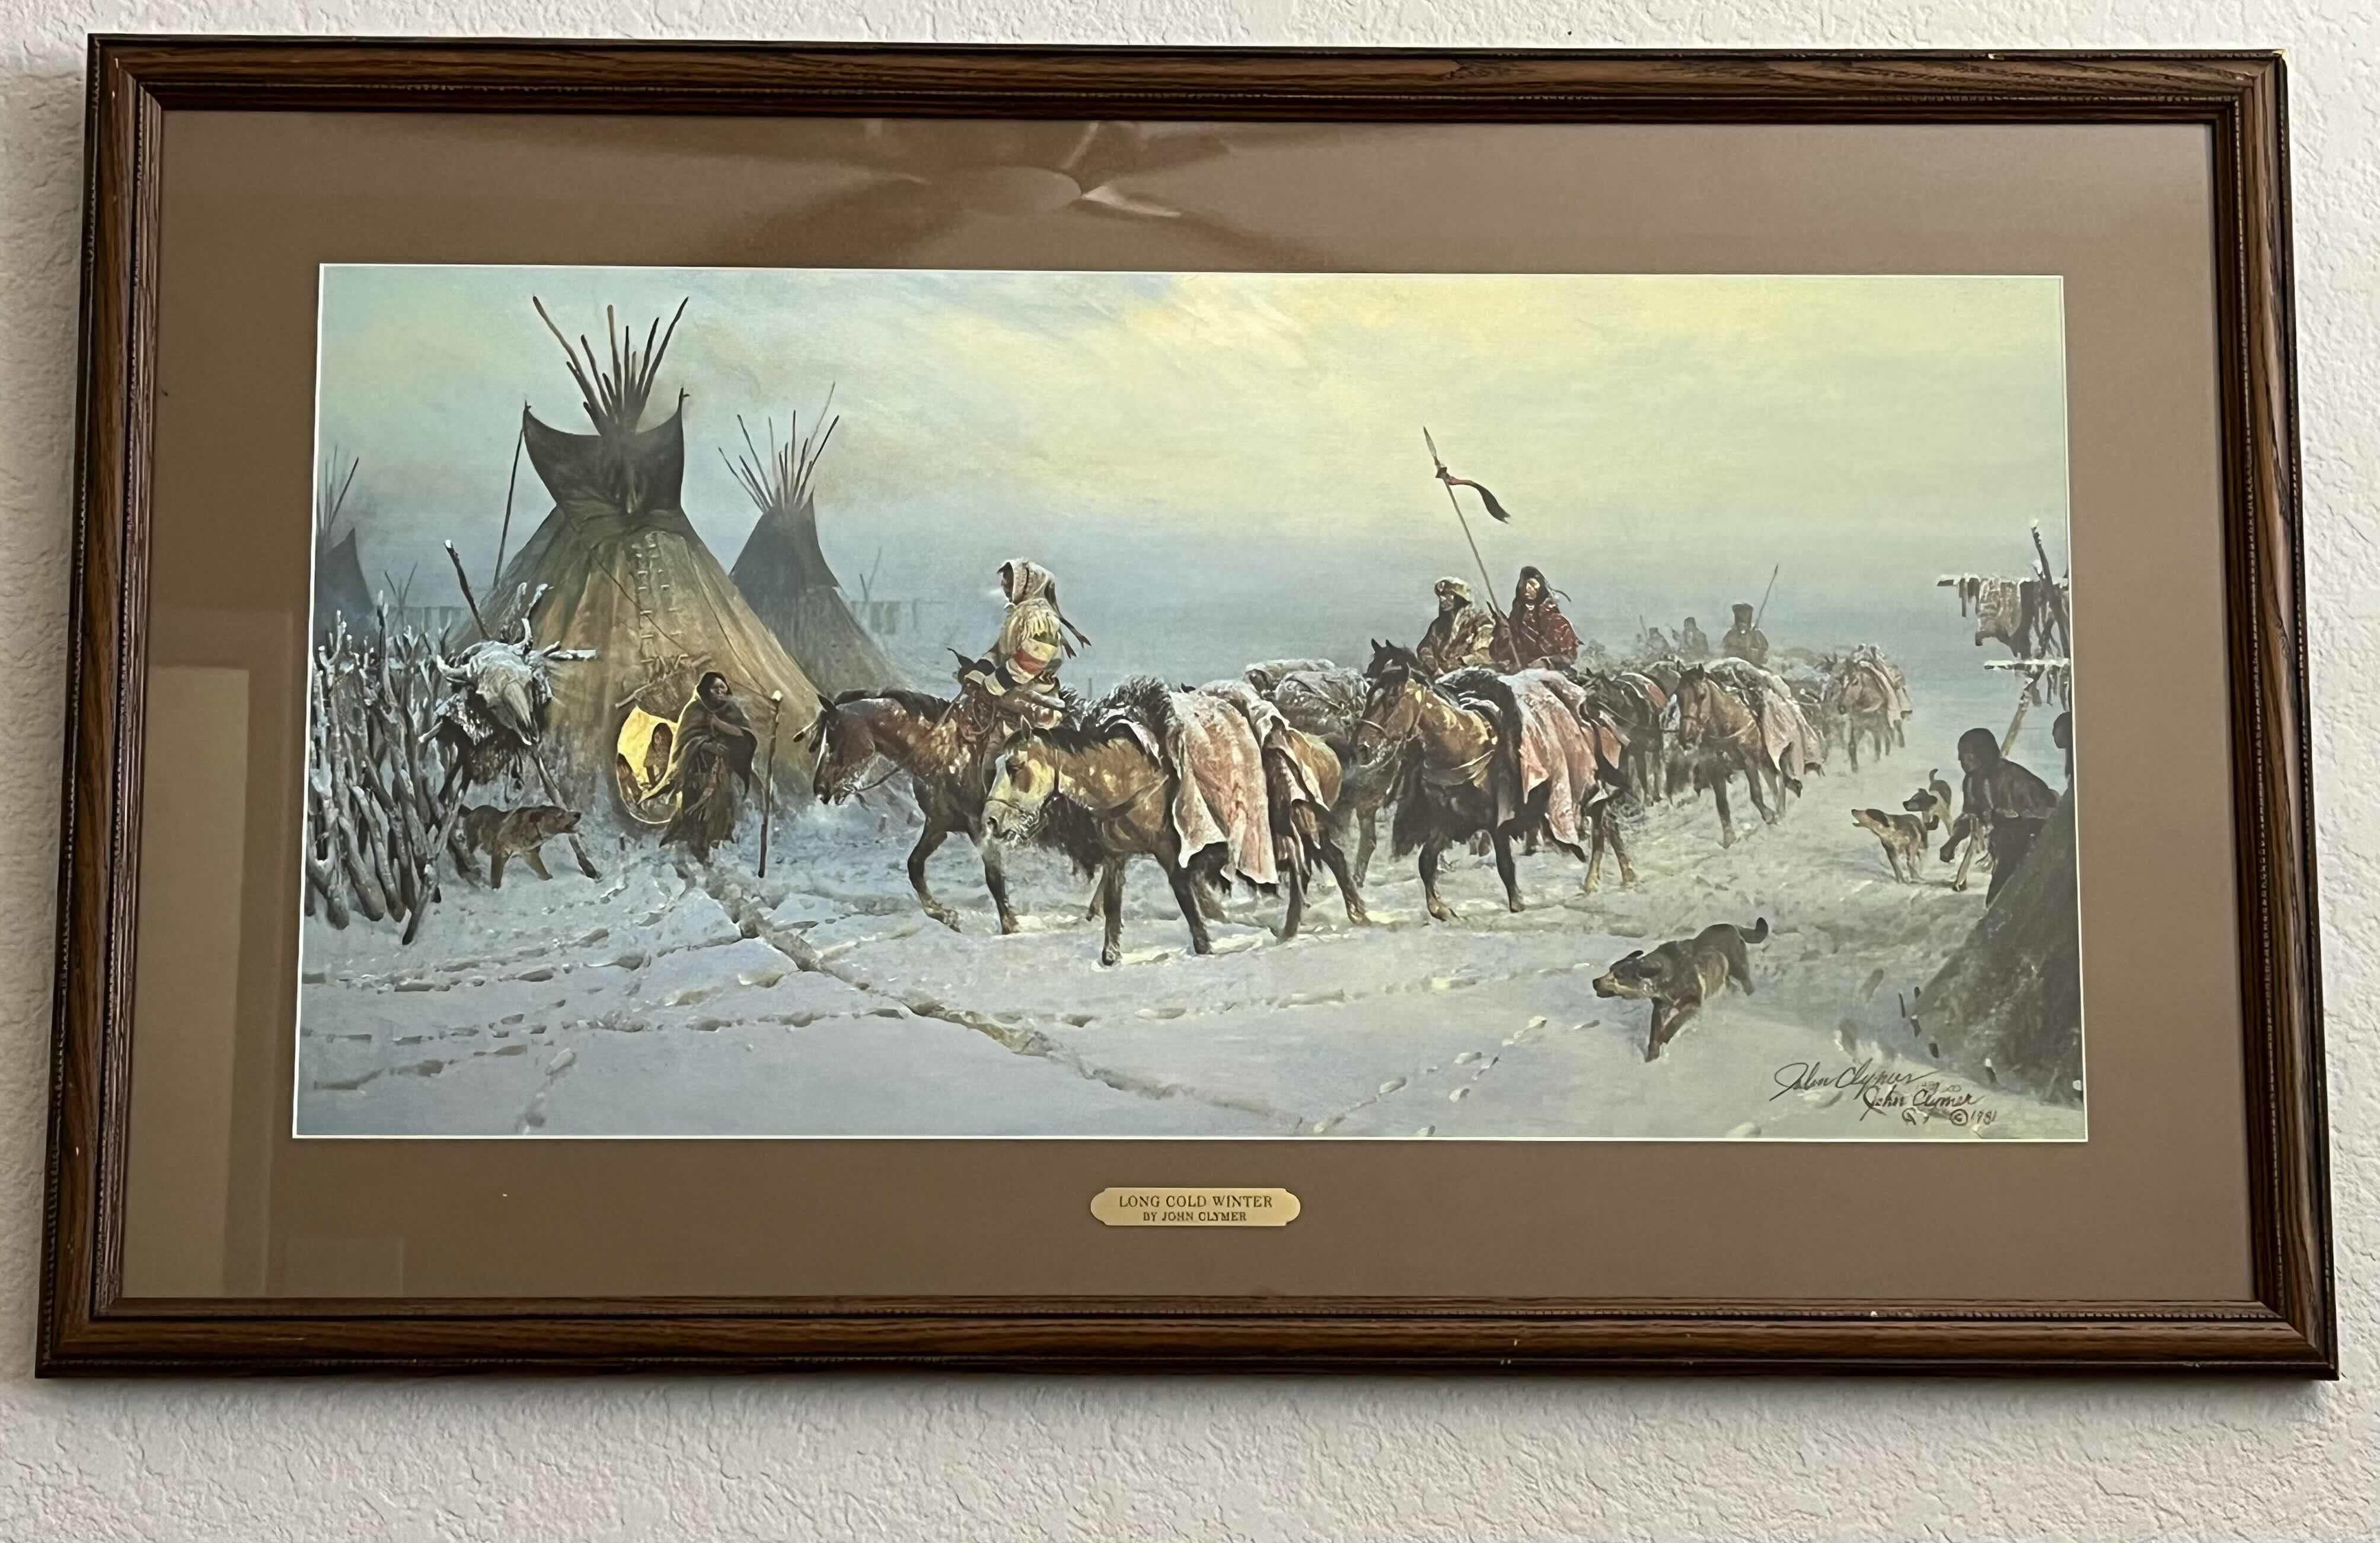 Photo 1 of LONG COLD WINTER NATIVE AMERICAN FRAMED ARTWORK SIGNED BY JOHN CLYMER 188/600 1981 37.75” X 22.75”